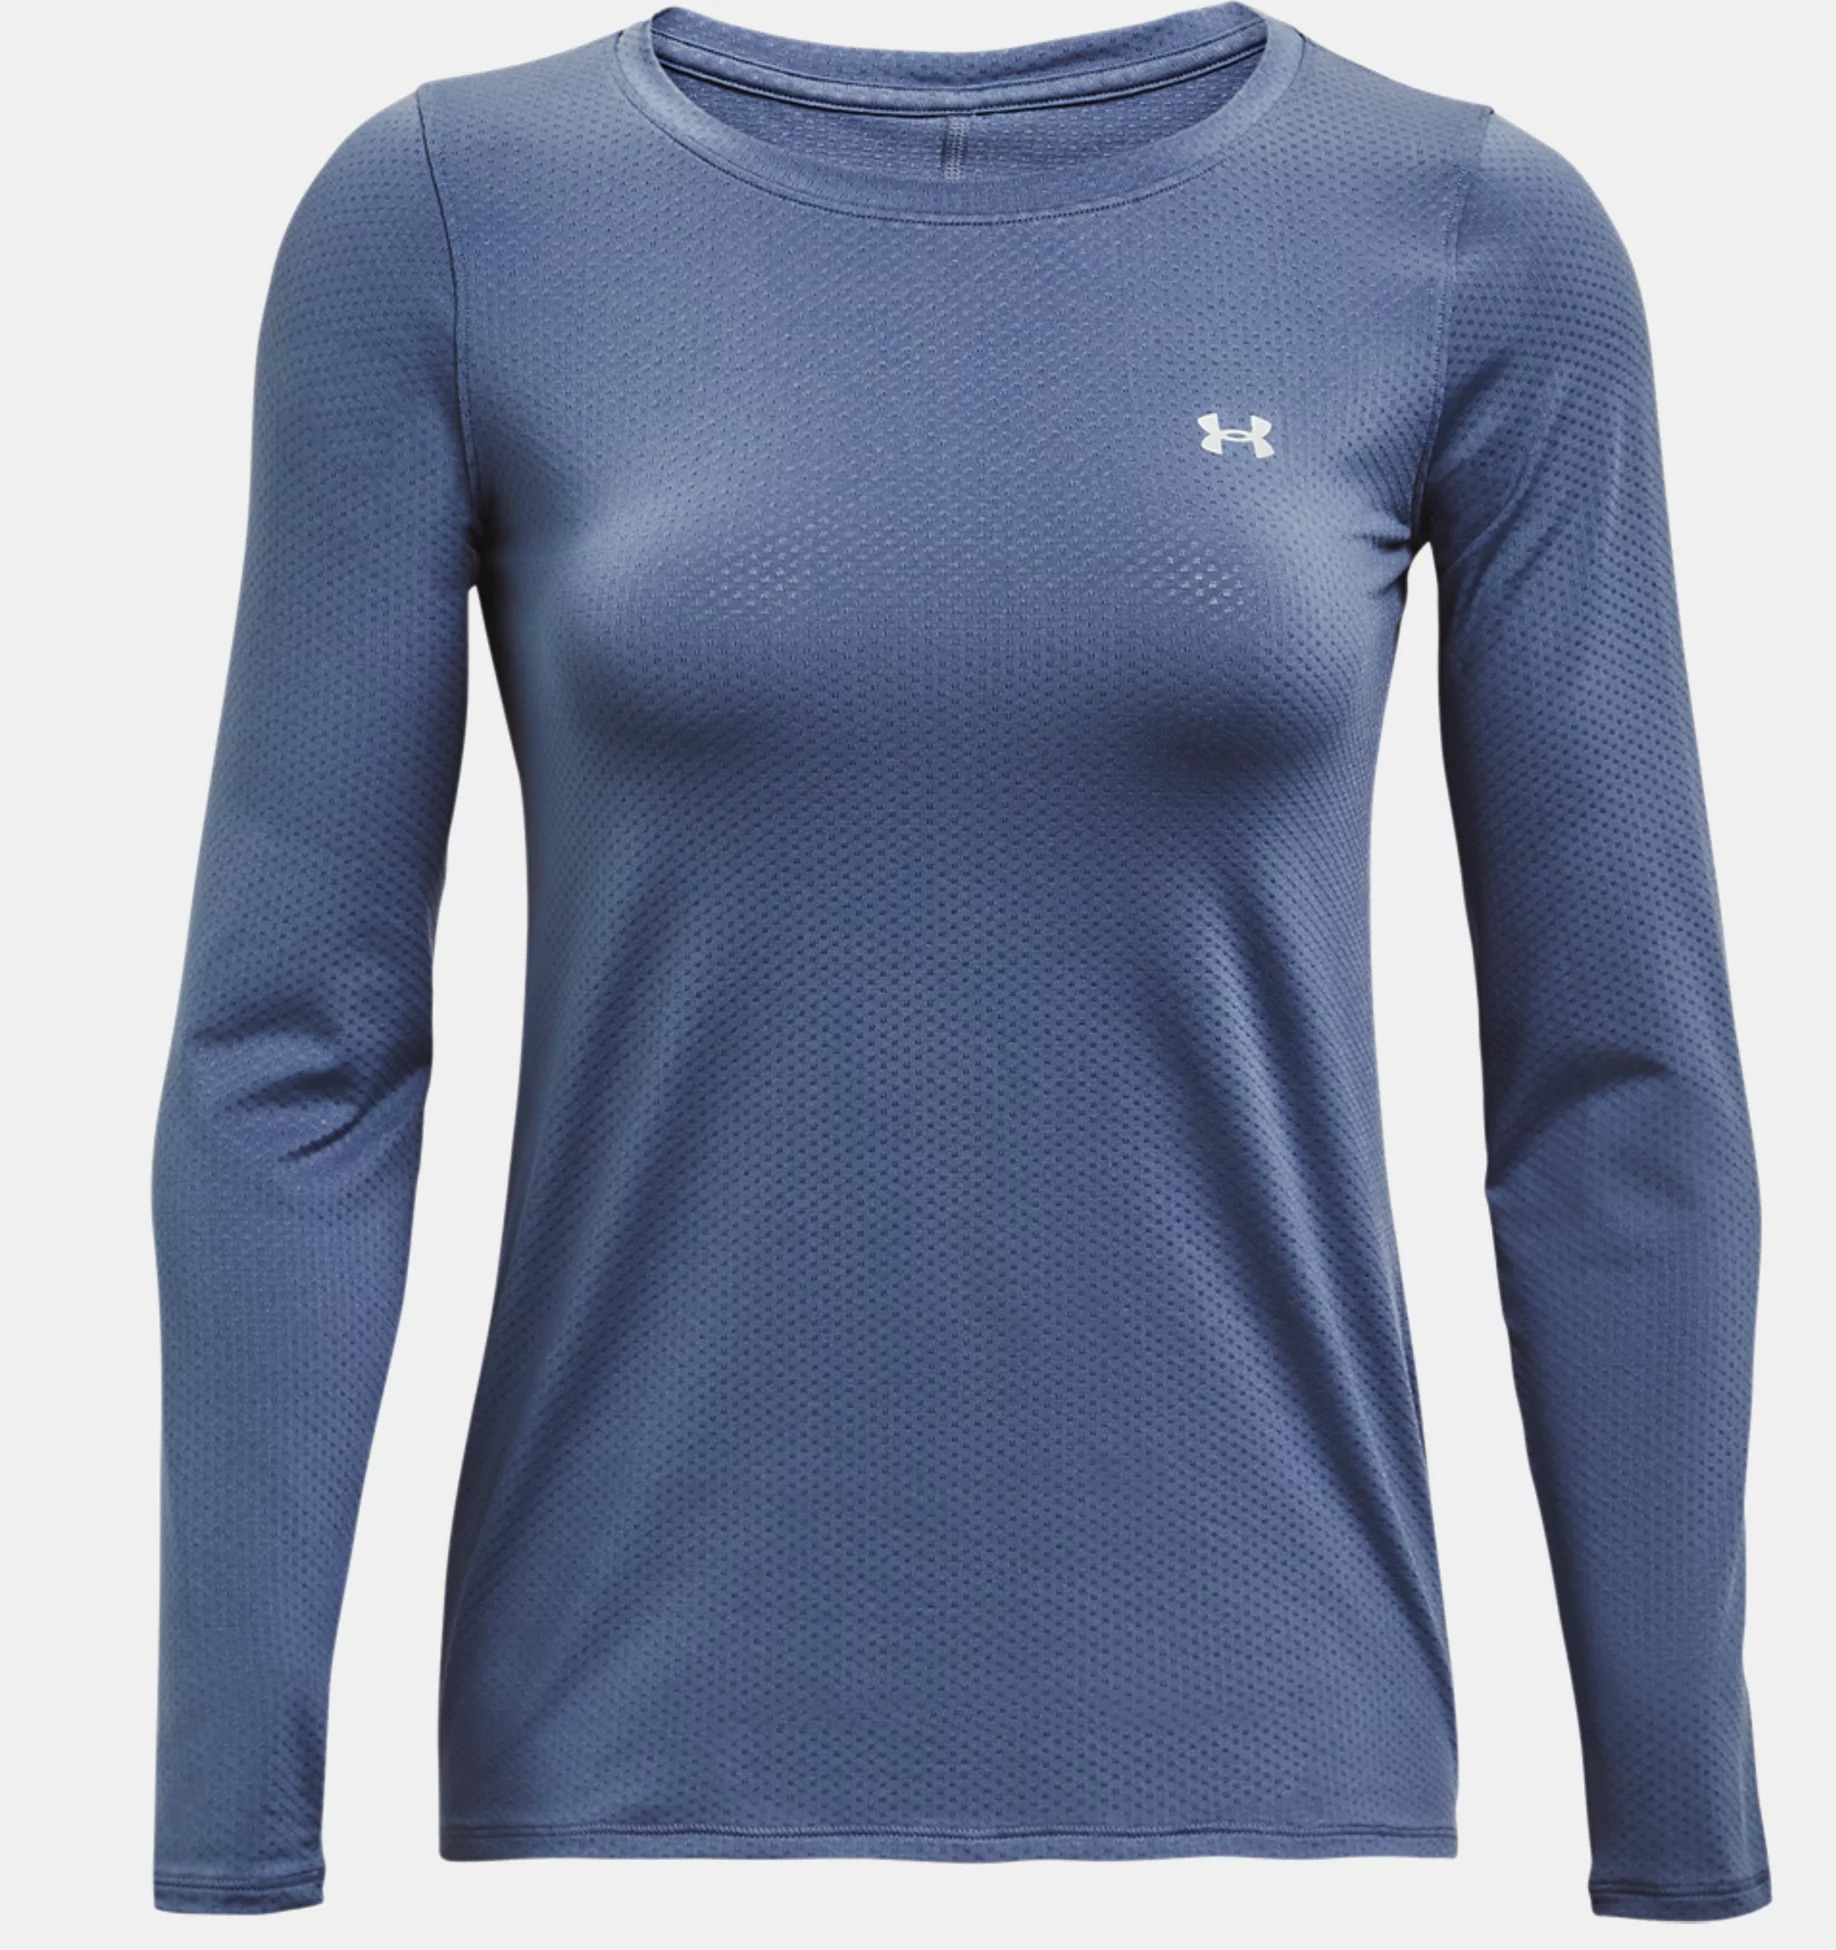 UNDER ARMOUR HEATGEAR Loose Teal Long Sleeved top XS NWT $24.63